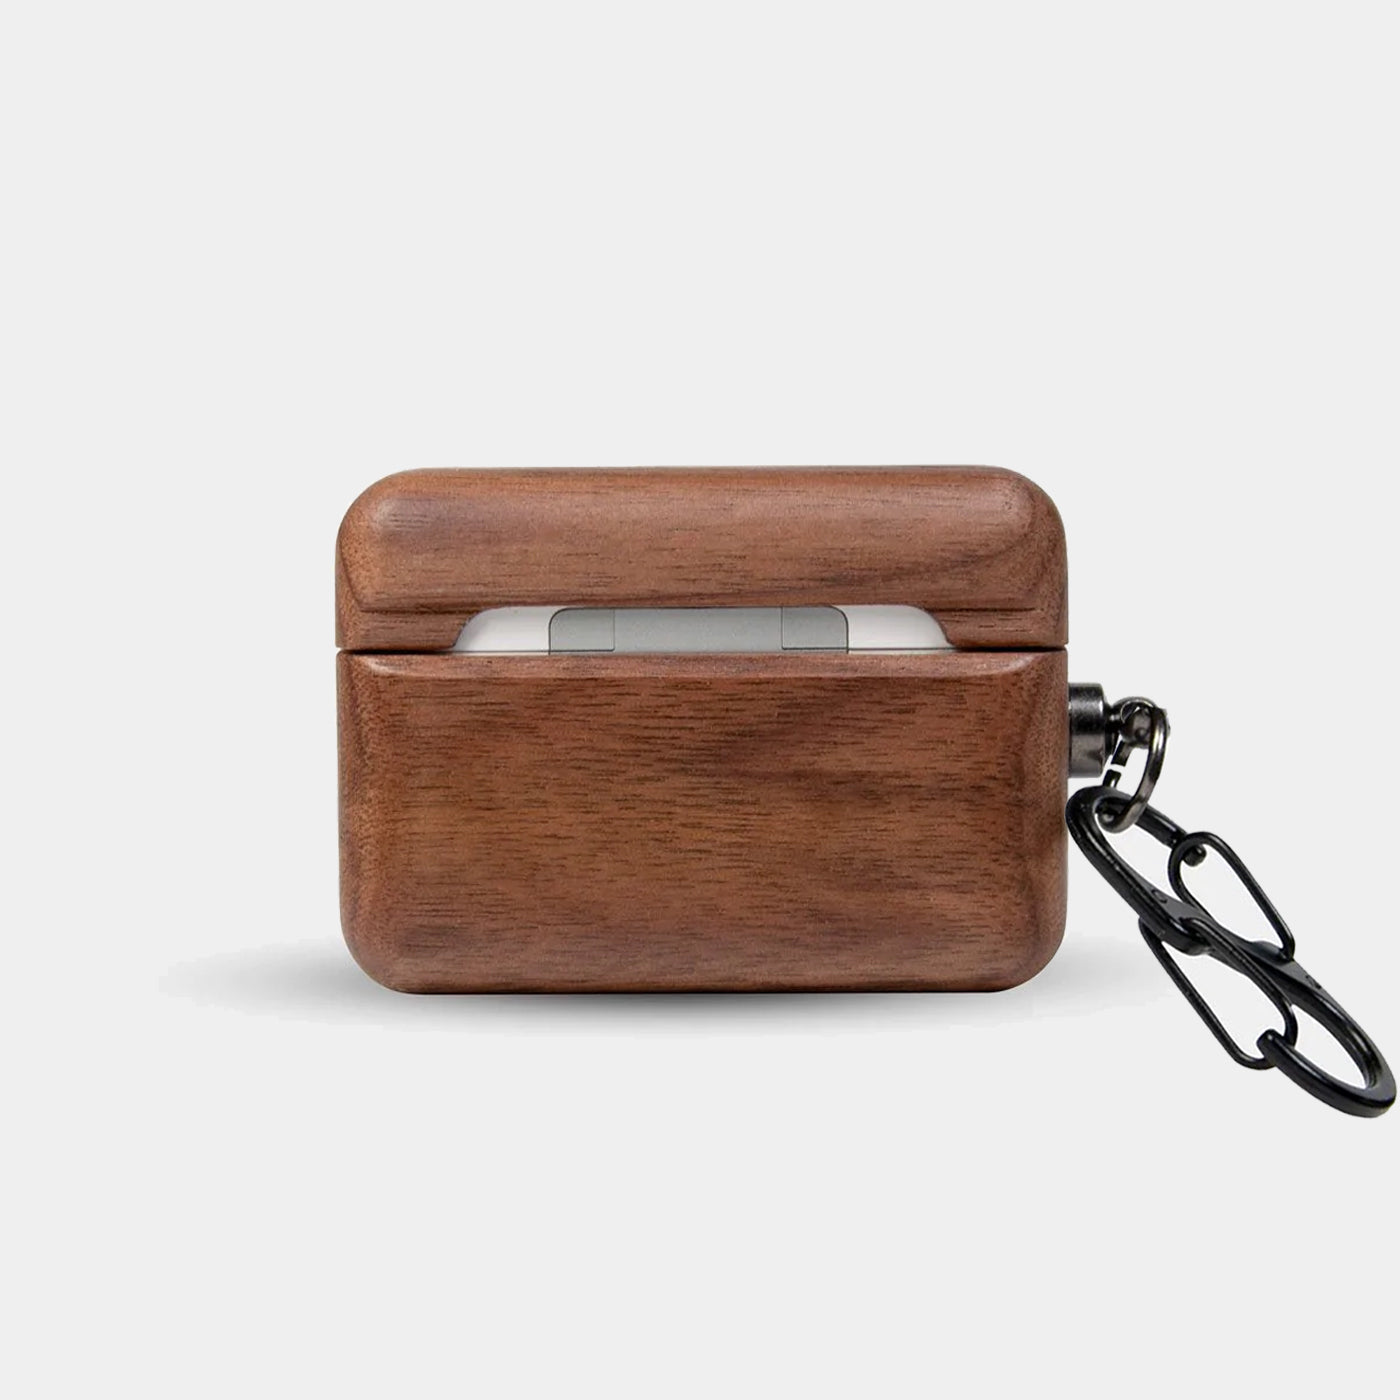 Custom Carved Wood AirPods Cases | AirPods | AirPods Pro | AirPods Pro 2 Covers